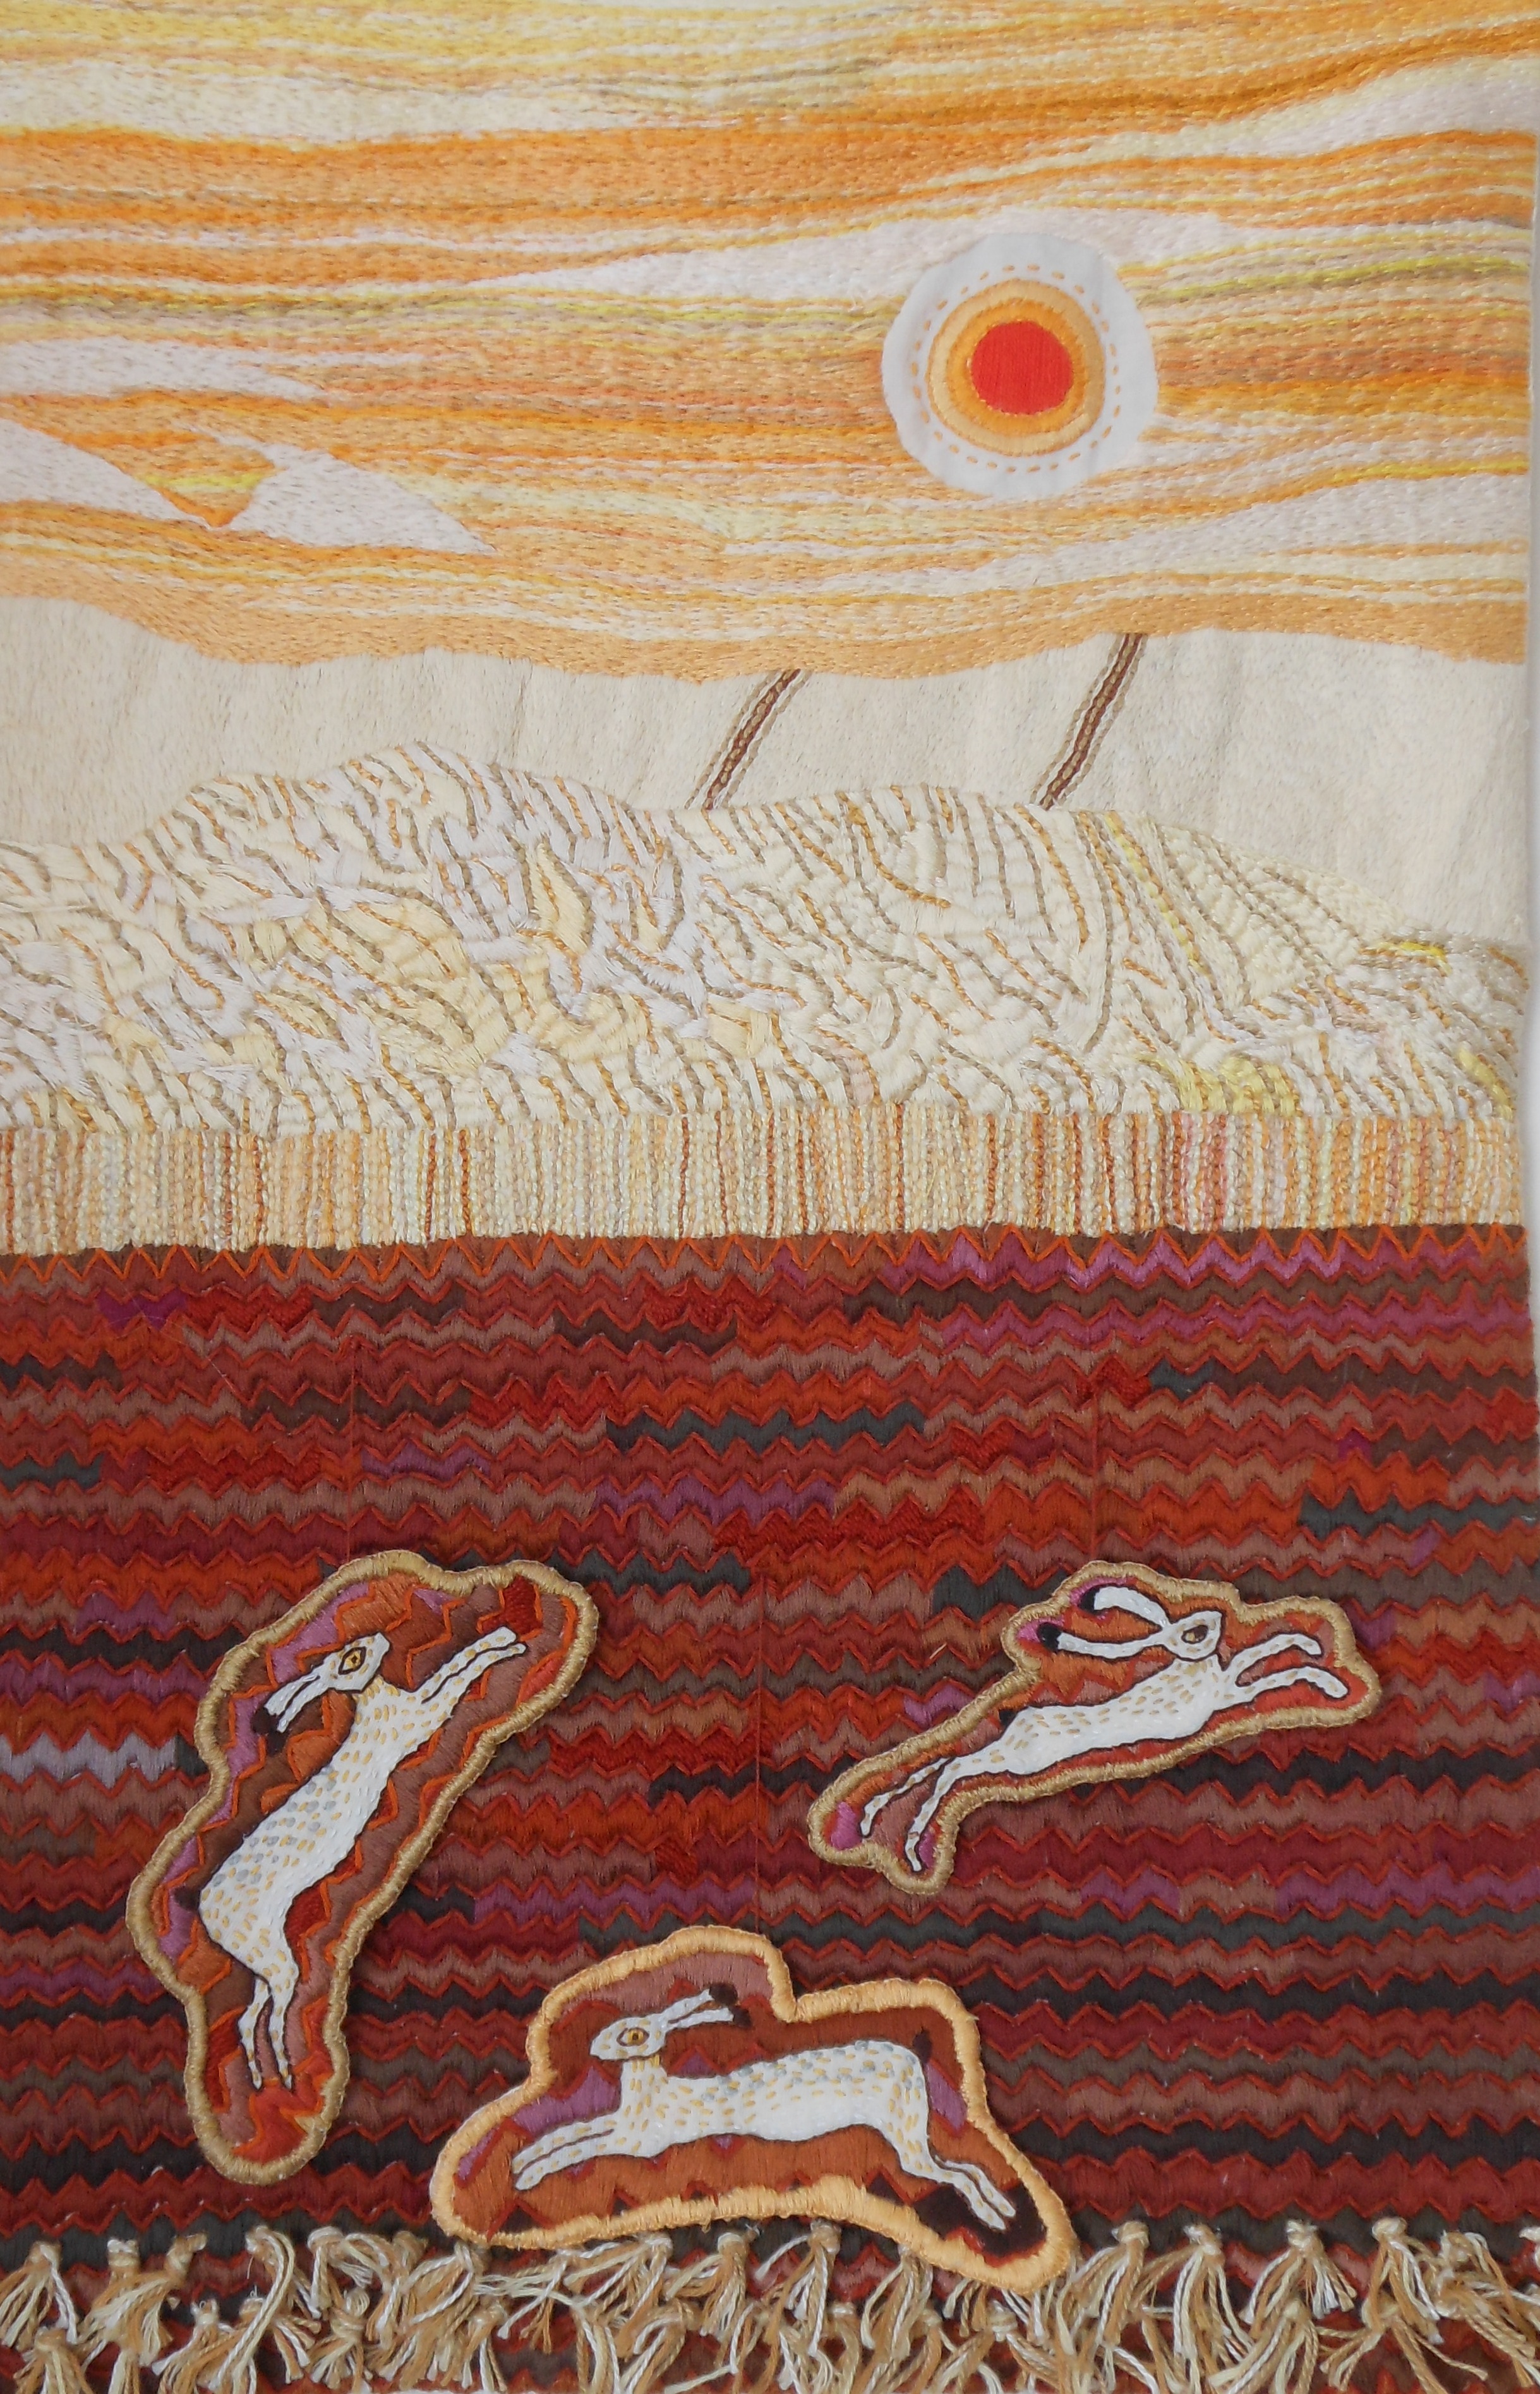 Harvest Hares in the Stubble